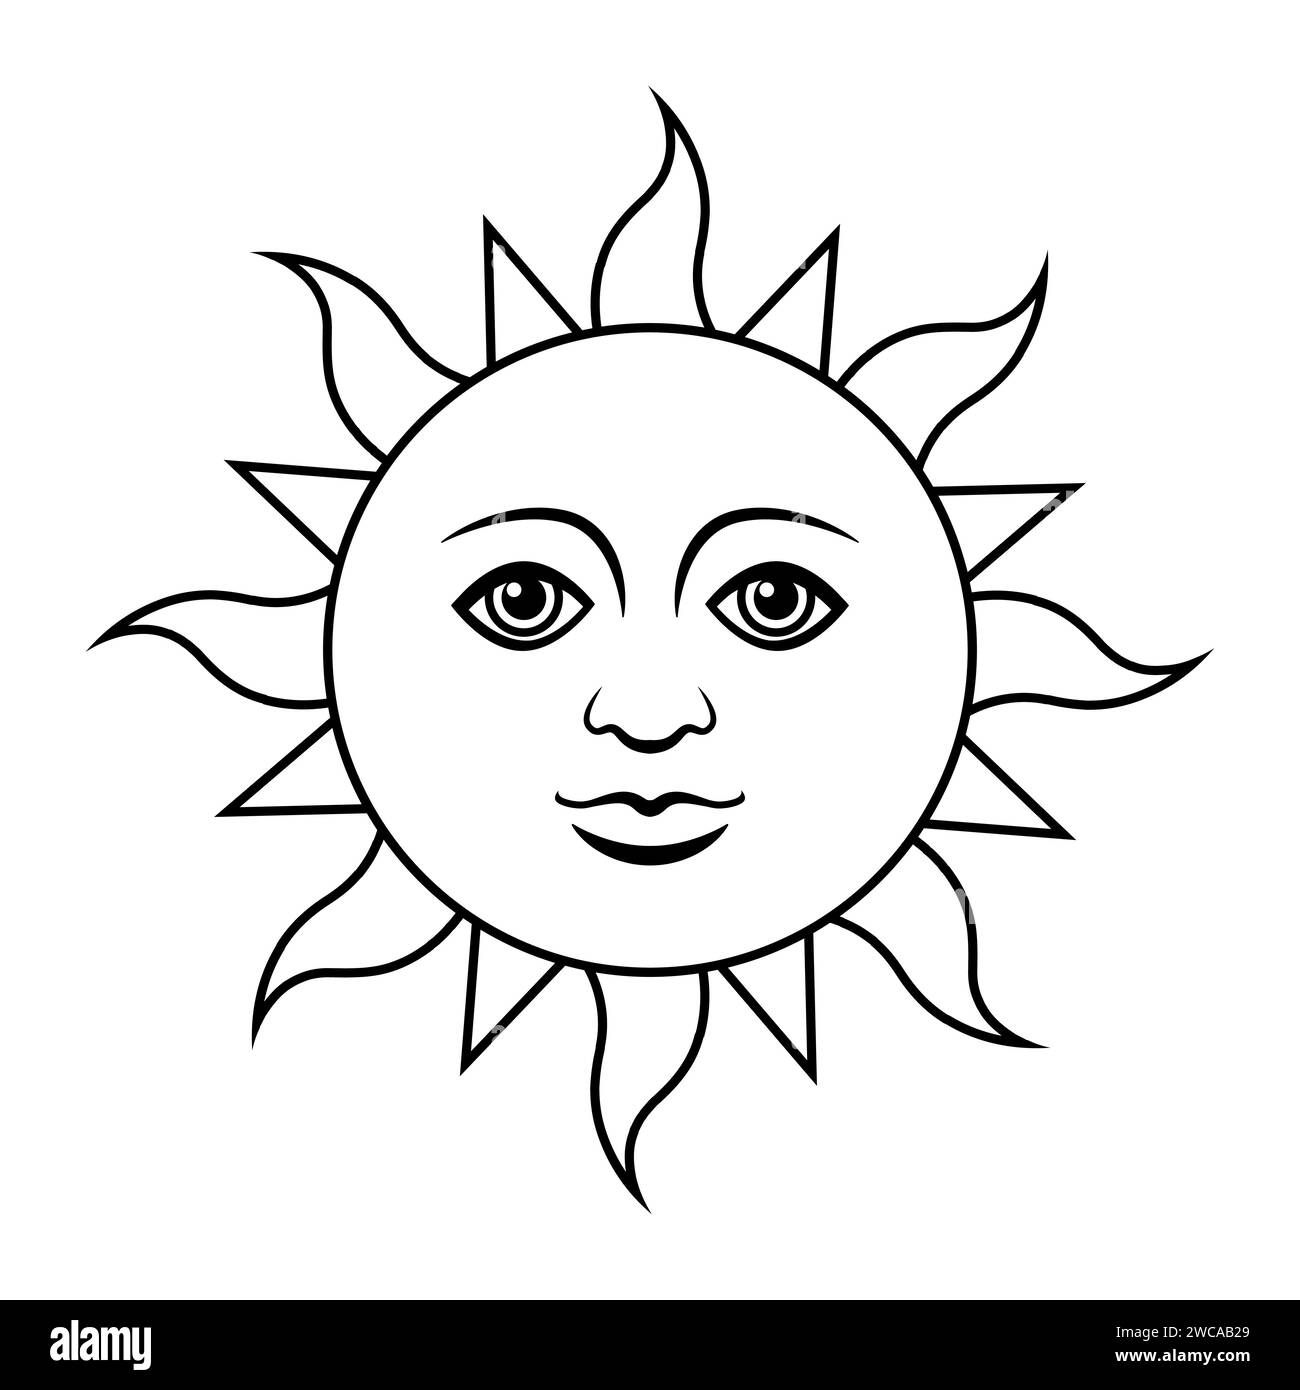 sun with face, black and white vector illustration isolated on white Stock Vector